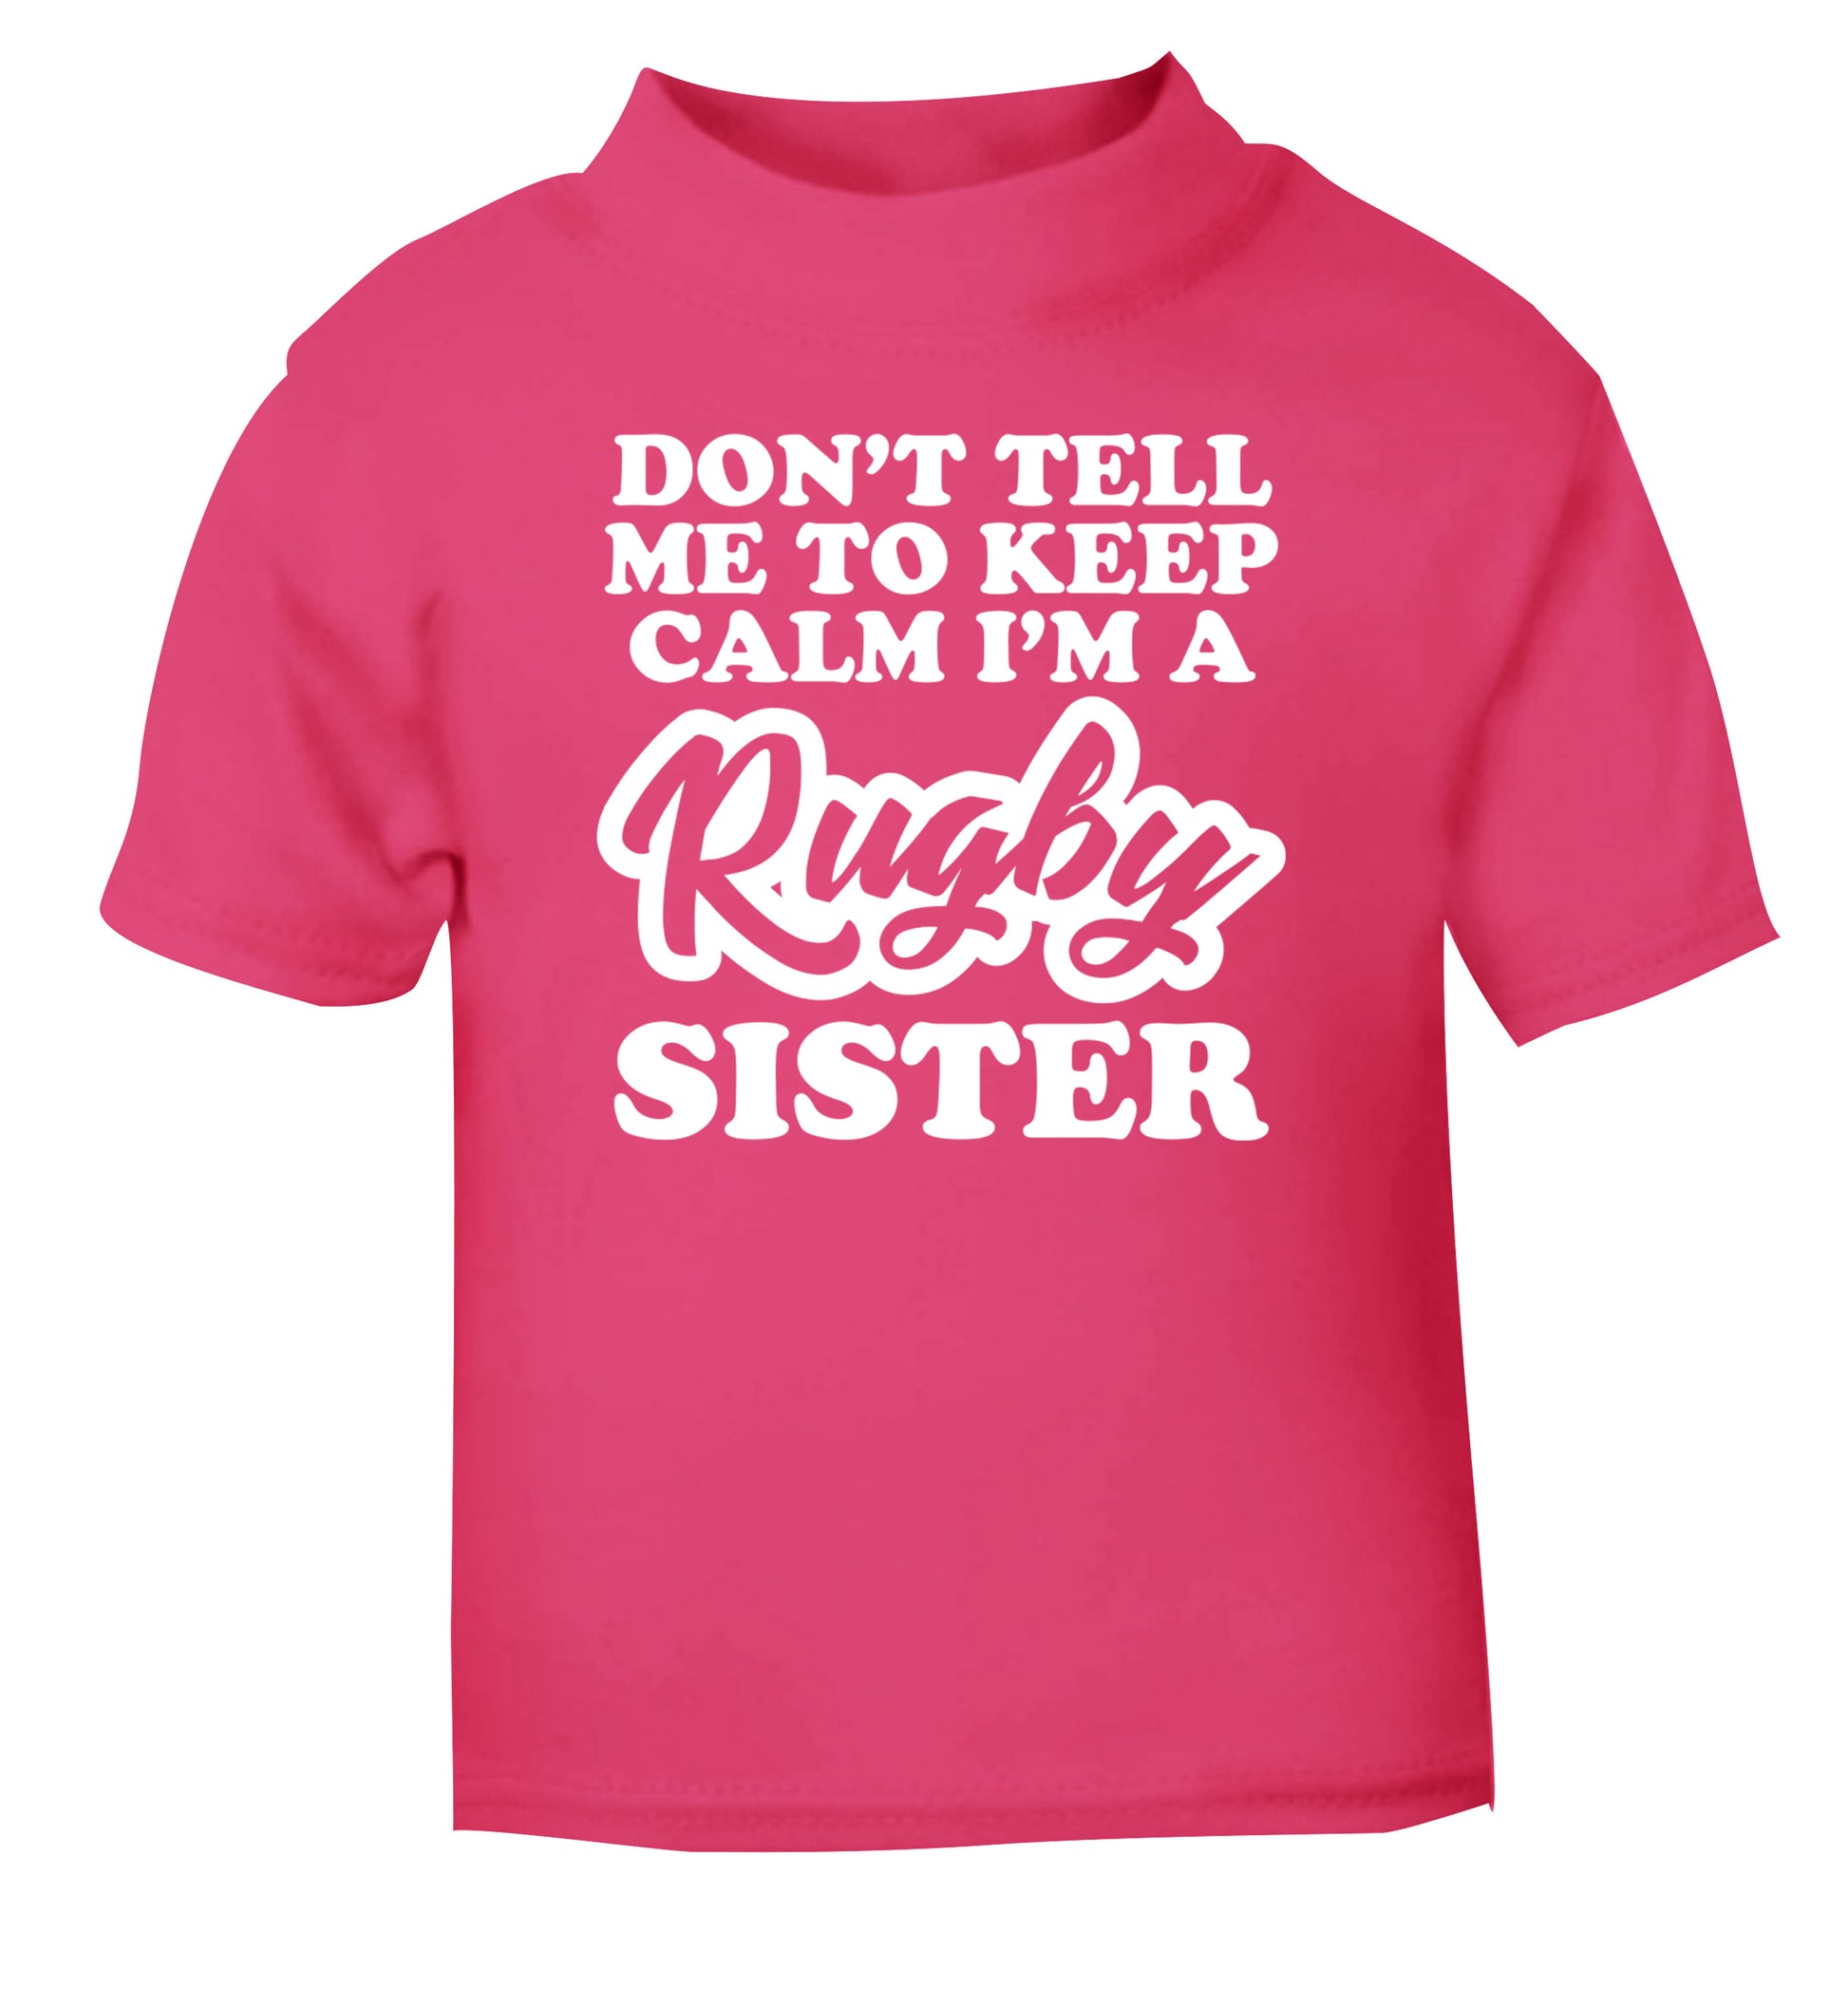 Don't tell me keep calm I'm a rugby sister pink Baby Toddler Tshirt 2 Years